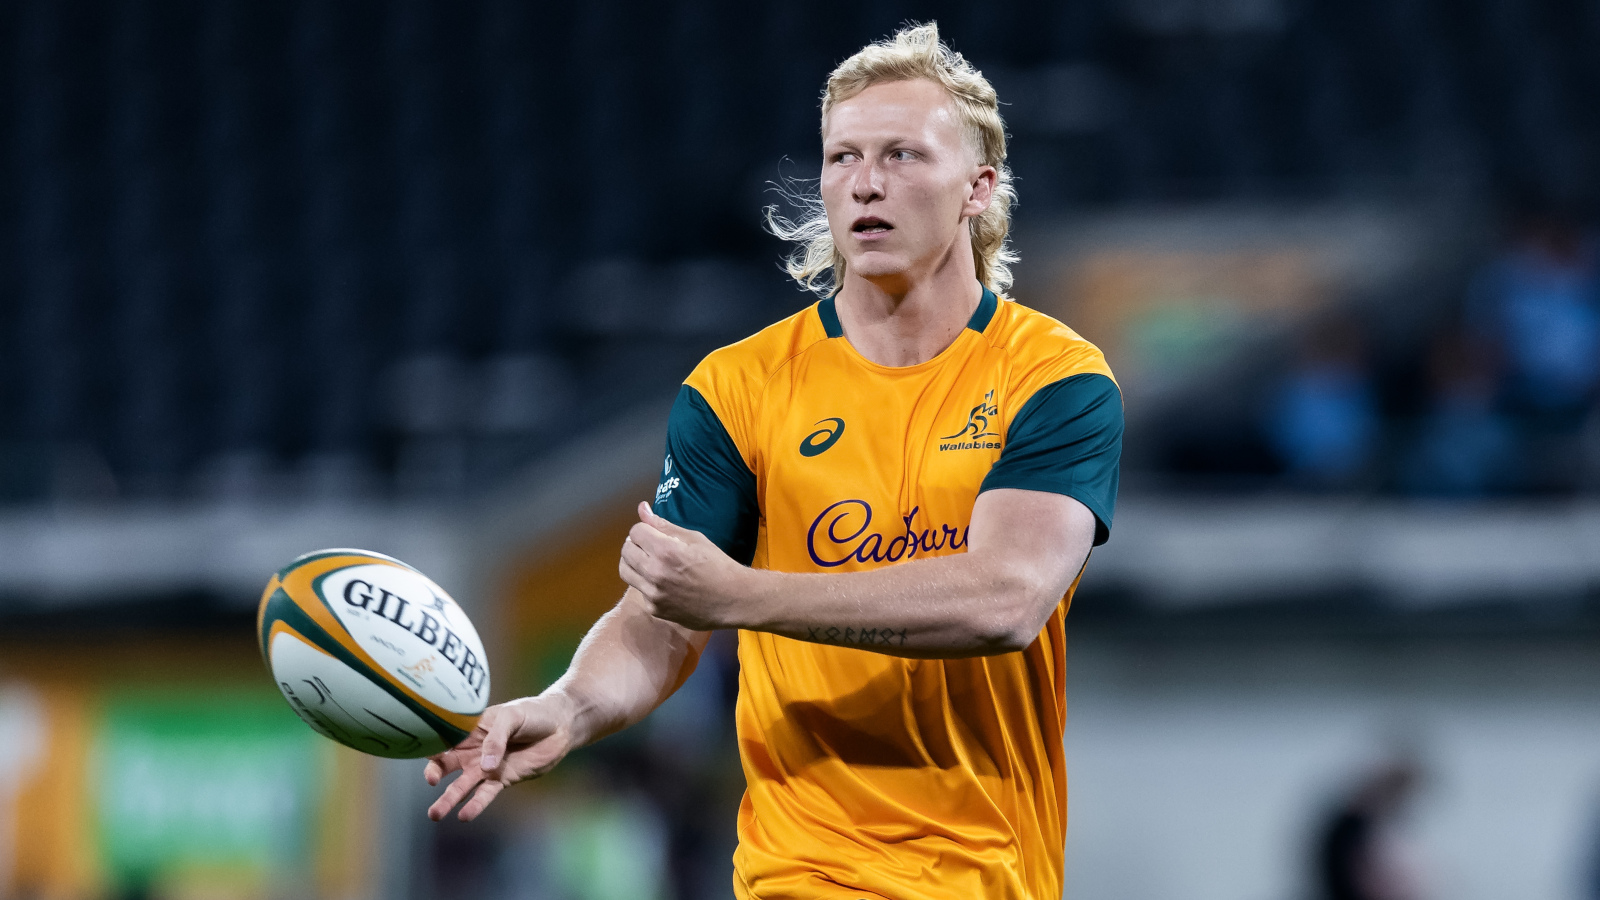 wallabies star in talks with nrl club over cross-code switch – report